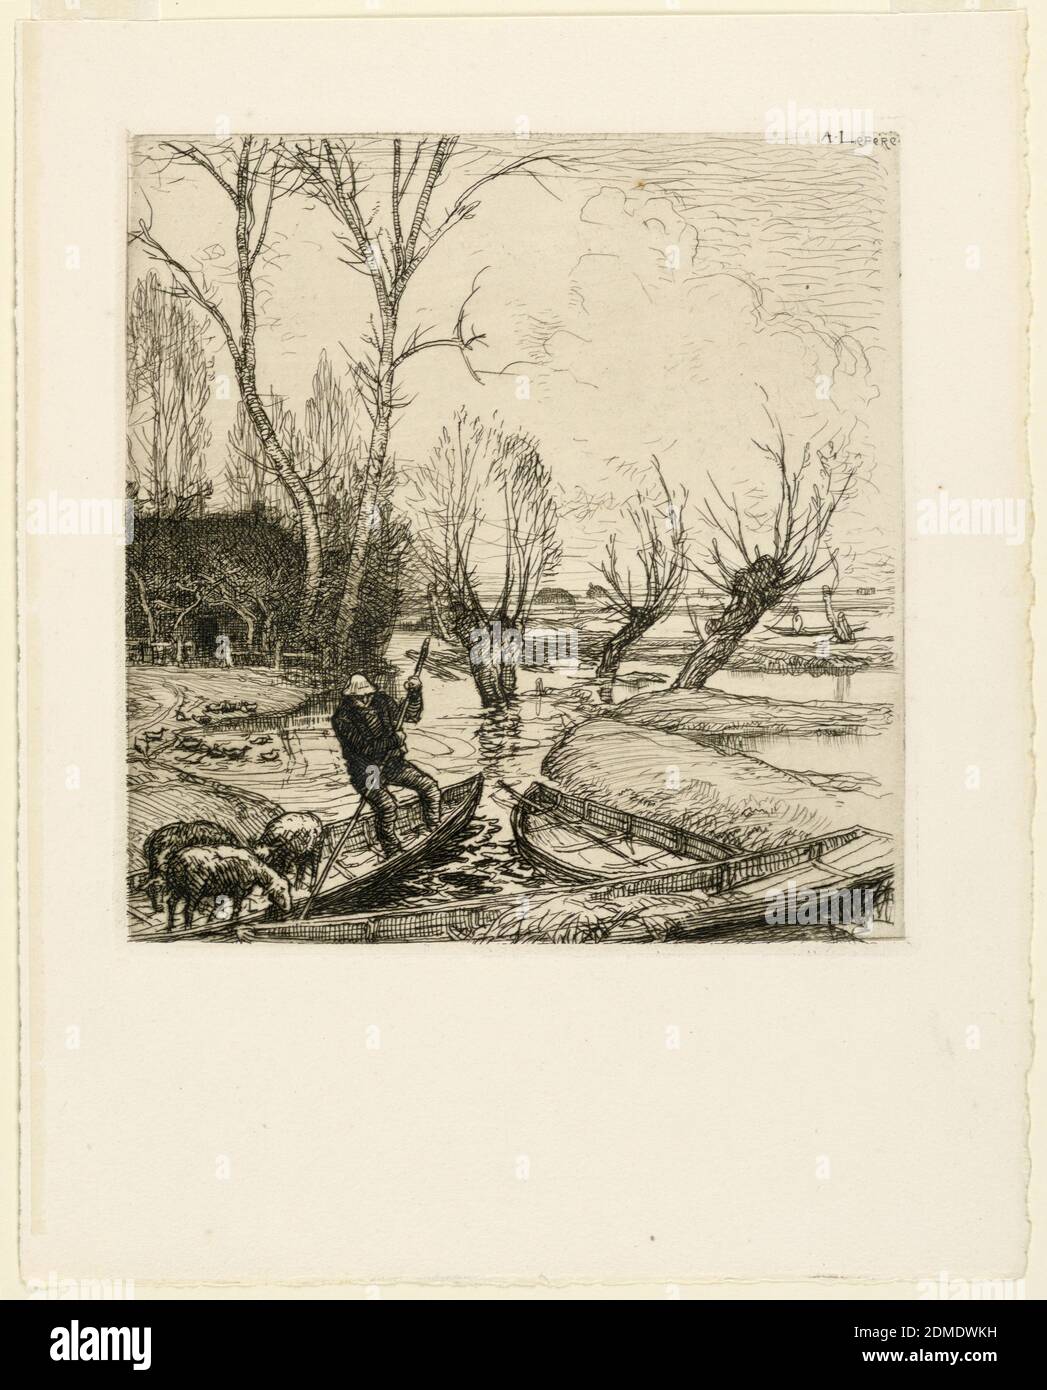 In the Deluged Marsh - The Shepherd (Au marais inonde - Le berger), Auguste Lepère, French, 1849 - 1918, Etching in black ink on cream-colored paper, France, 1911, Print Stock Photo